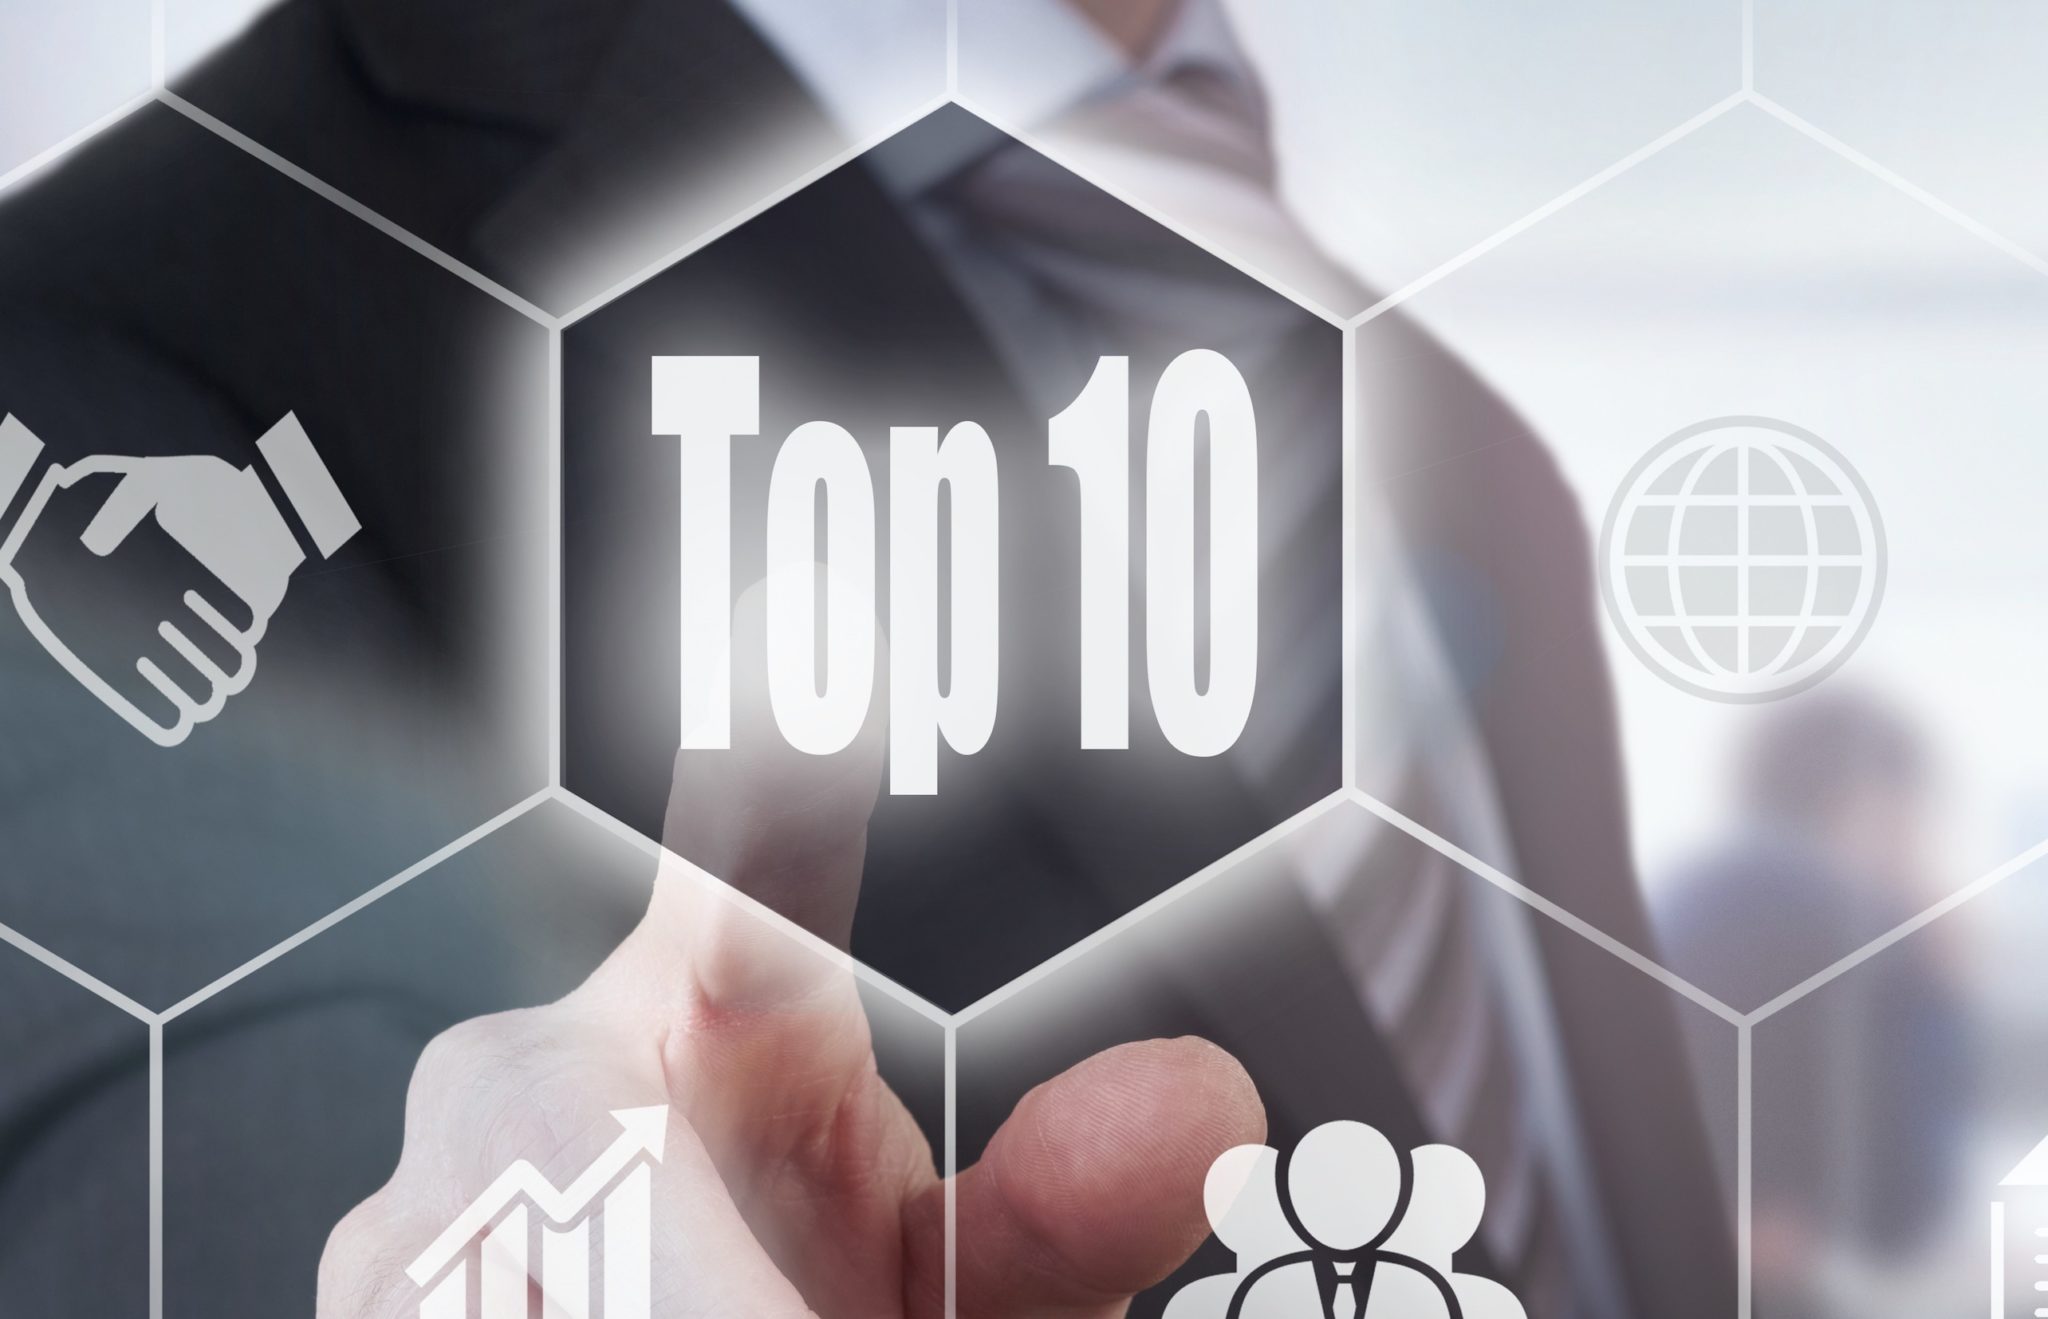 The Top 10 Cryptocurrencies of 2018 to Know About